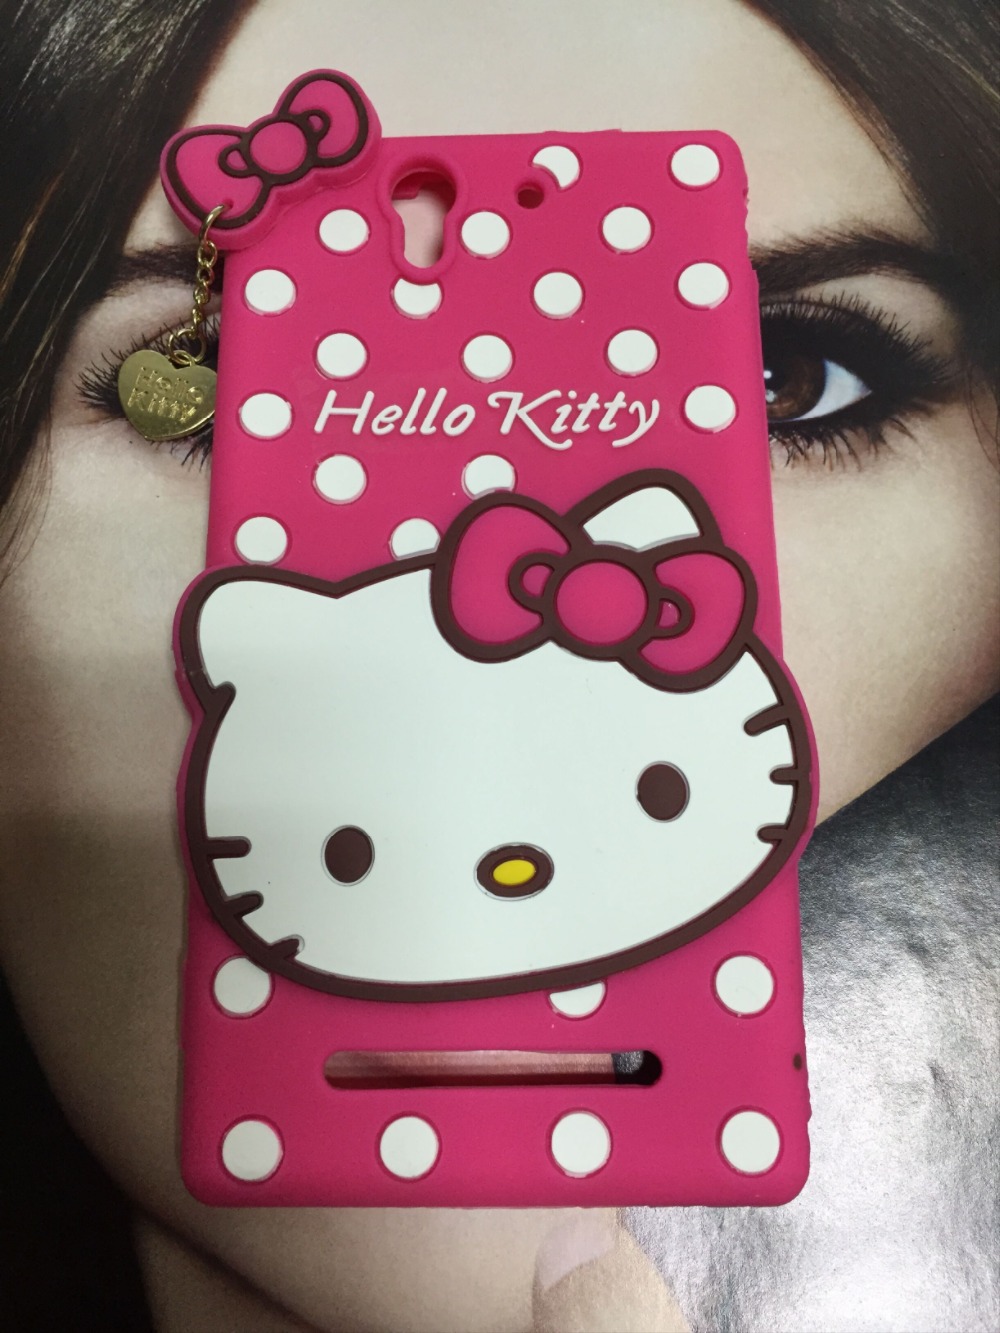 Cute Cartoon for xperia Sony C3 S55t Case Sulleytigercathello kitty Silicon Soft rubber phone case cover,10PCS